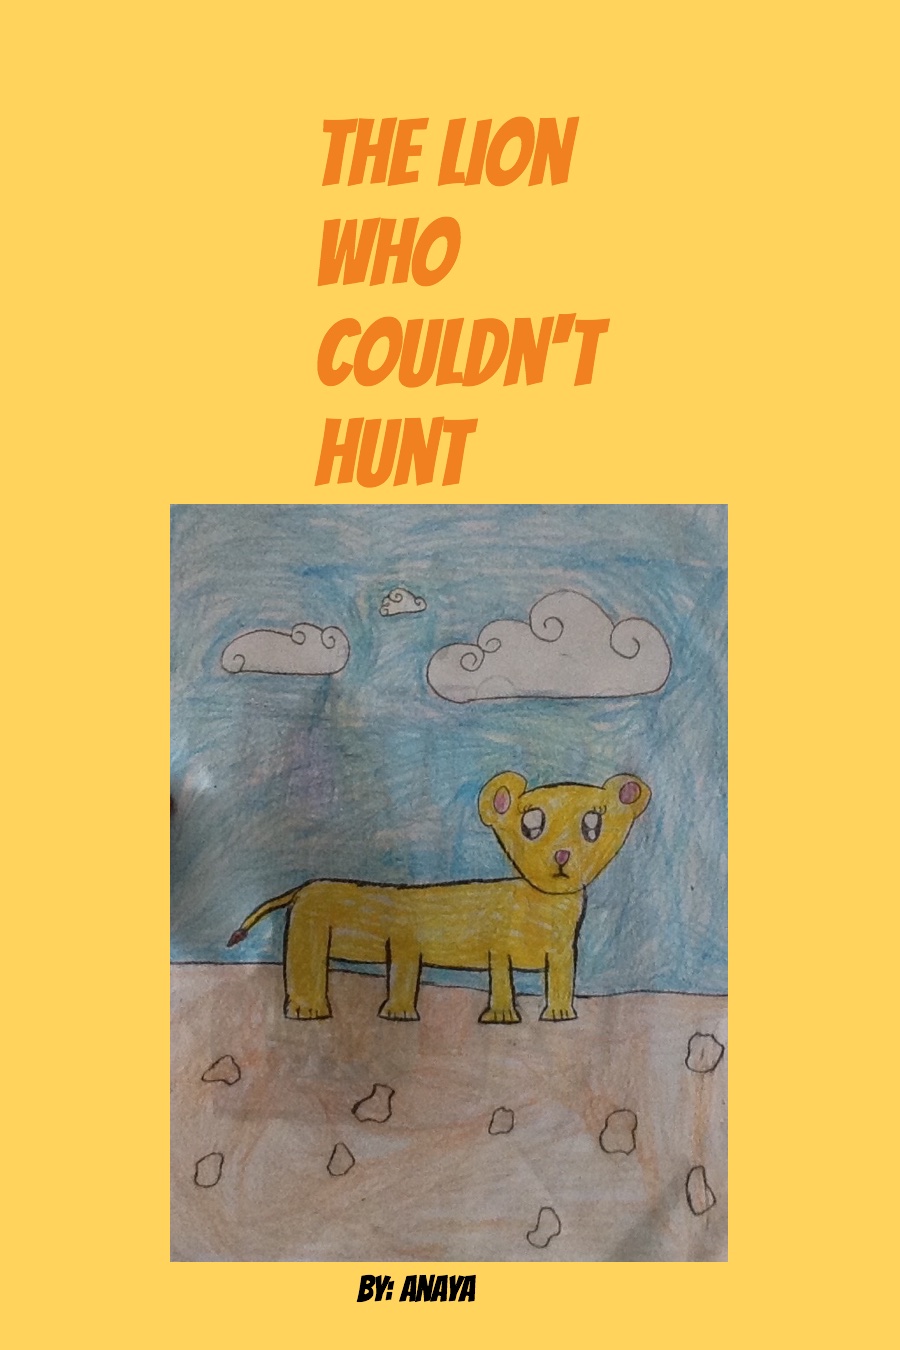 The Lion Who Couldn’t Hunt by Anaya S